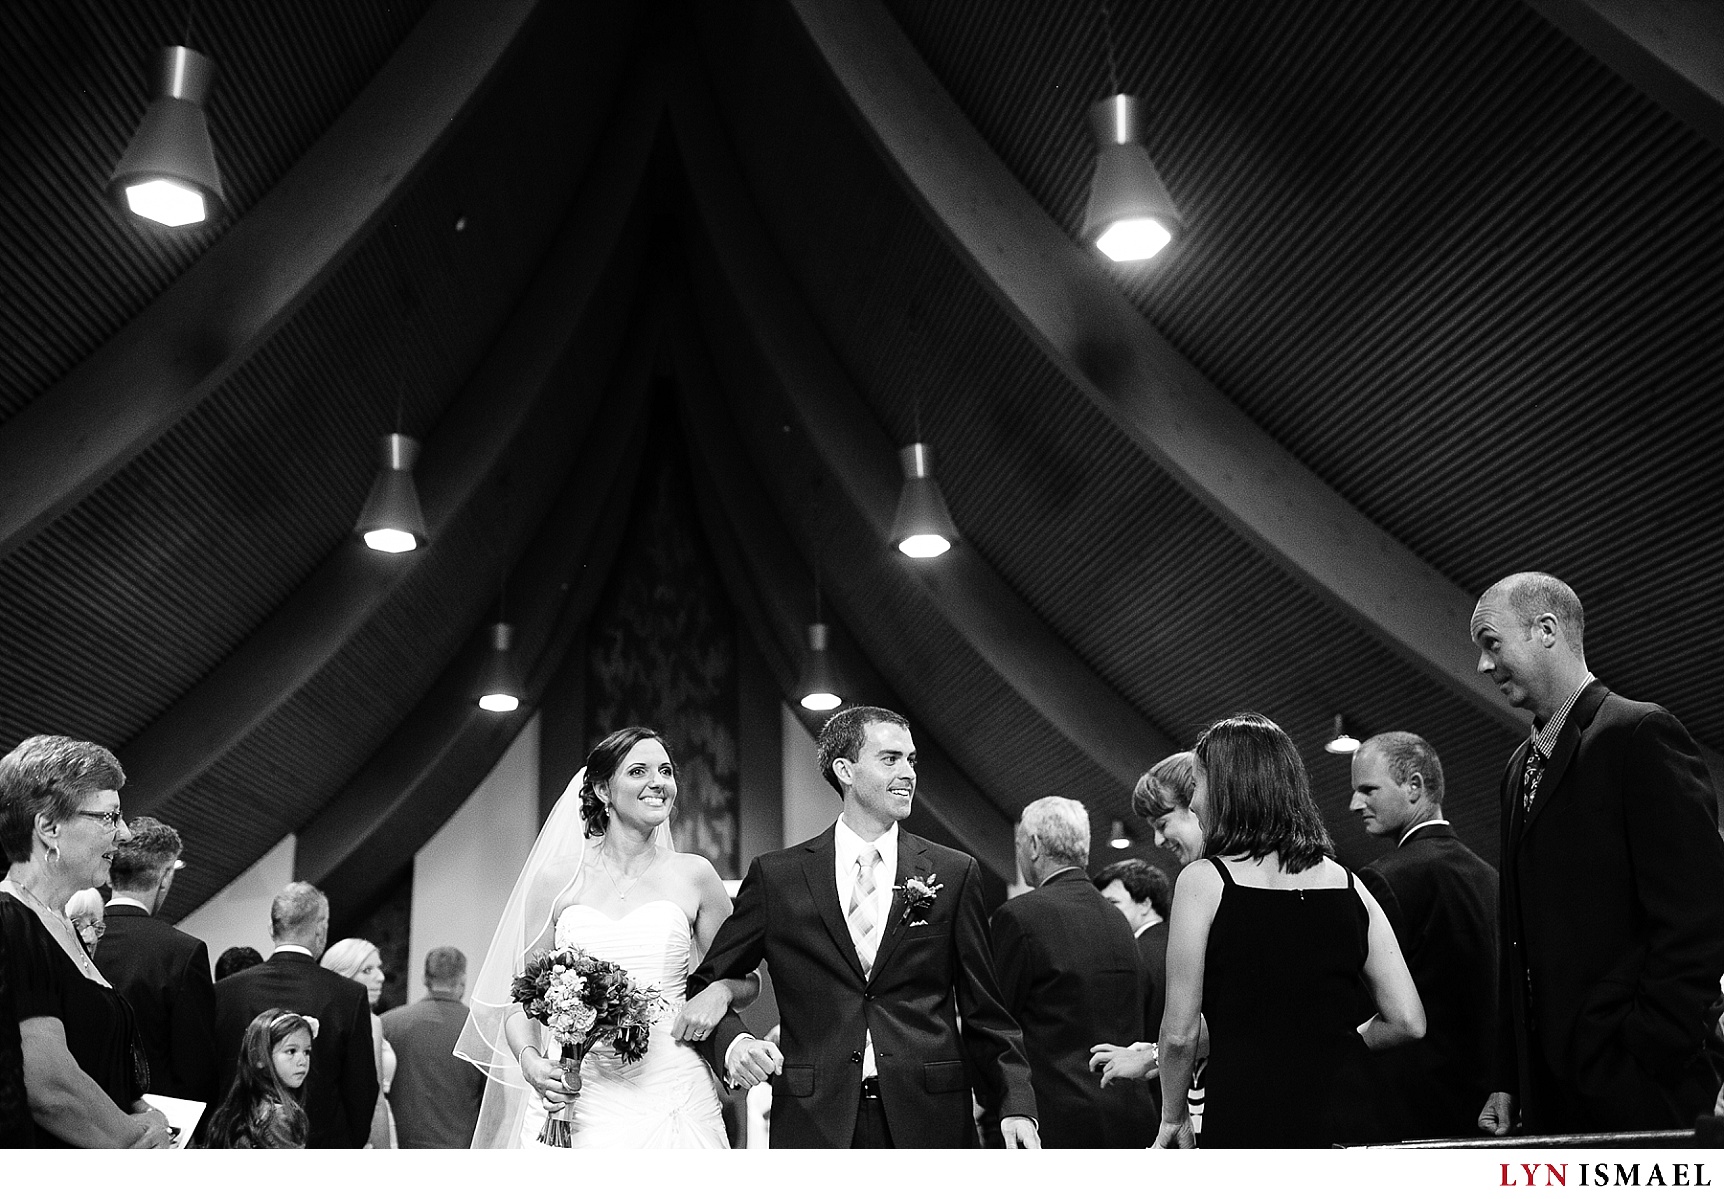 A black and white image of the bride and groom walking down the aisle.